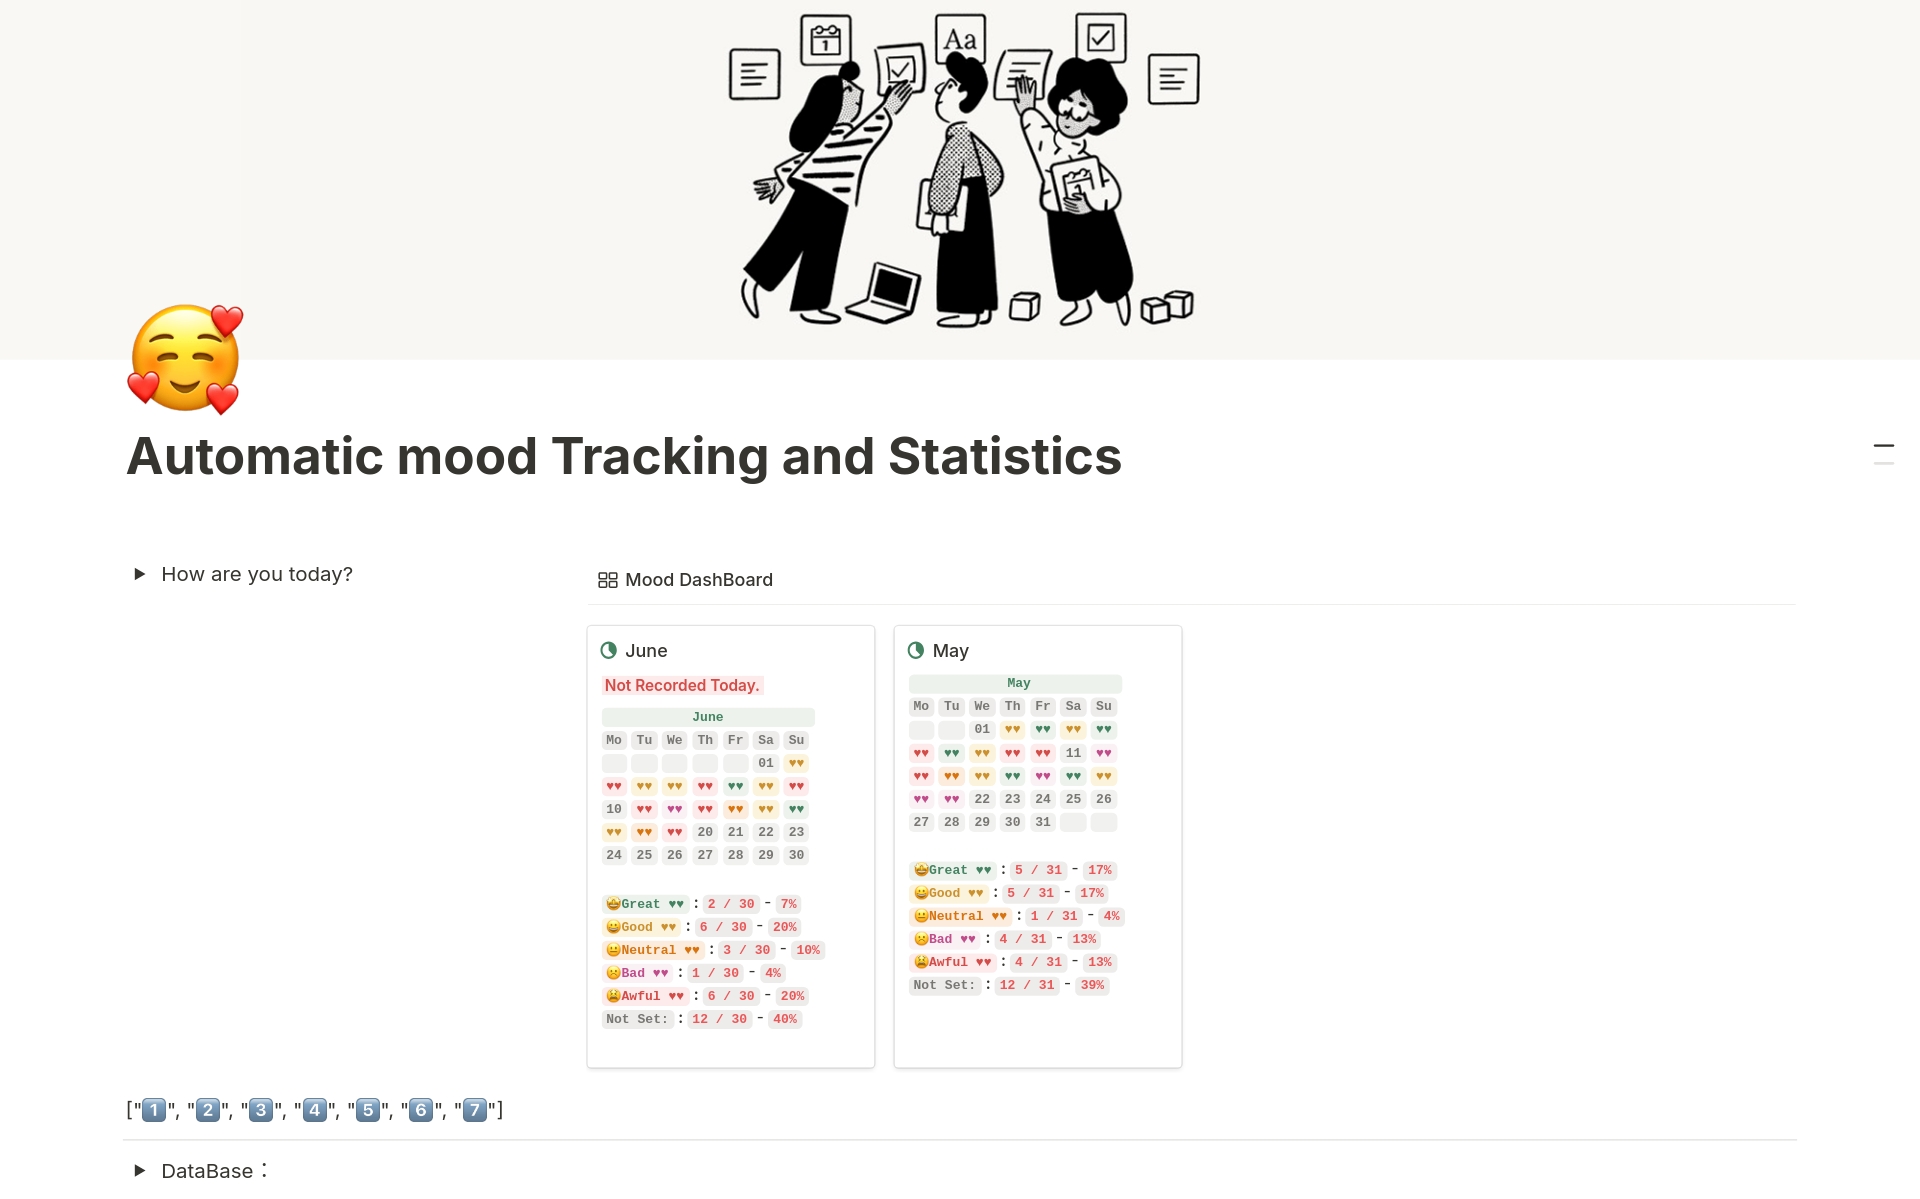 Our Template Experience a streamlined way to log your daily emotions with just one click. You can quickly select how you're feeling today from five distinct moods: Great, Good, Neutral, Bad, and Awful. And your moods are visually displayed in a calendar format.